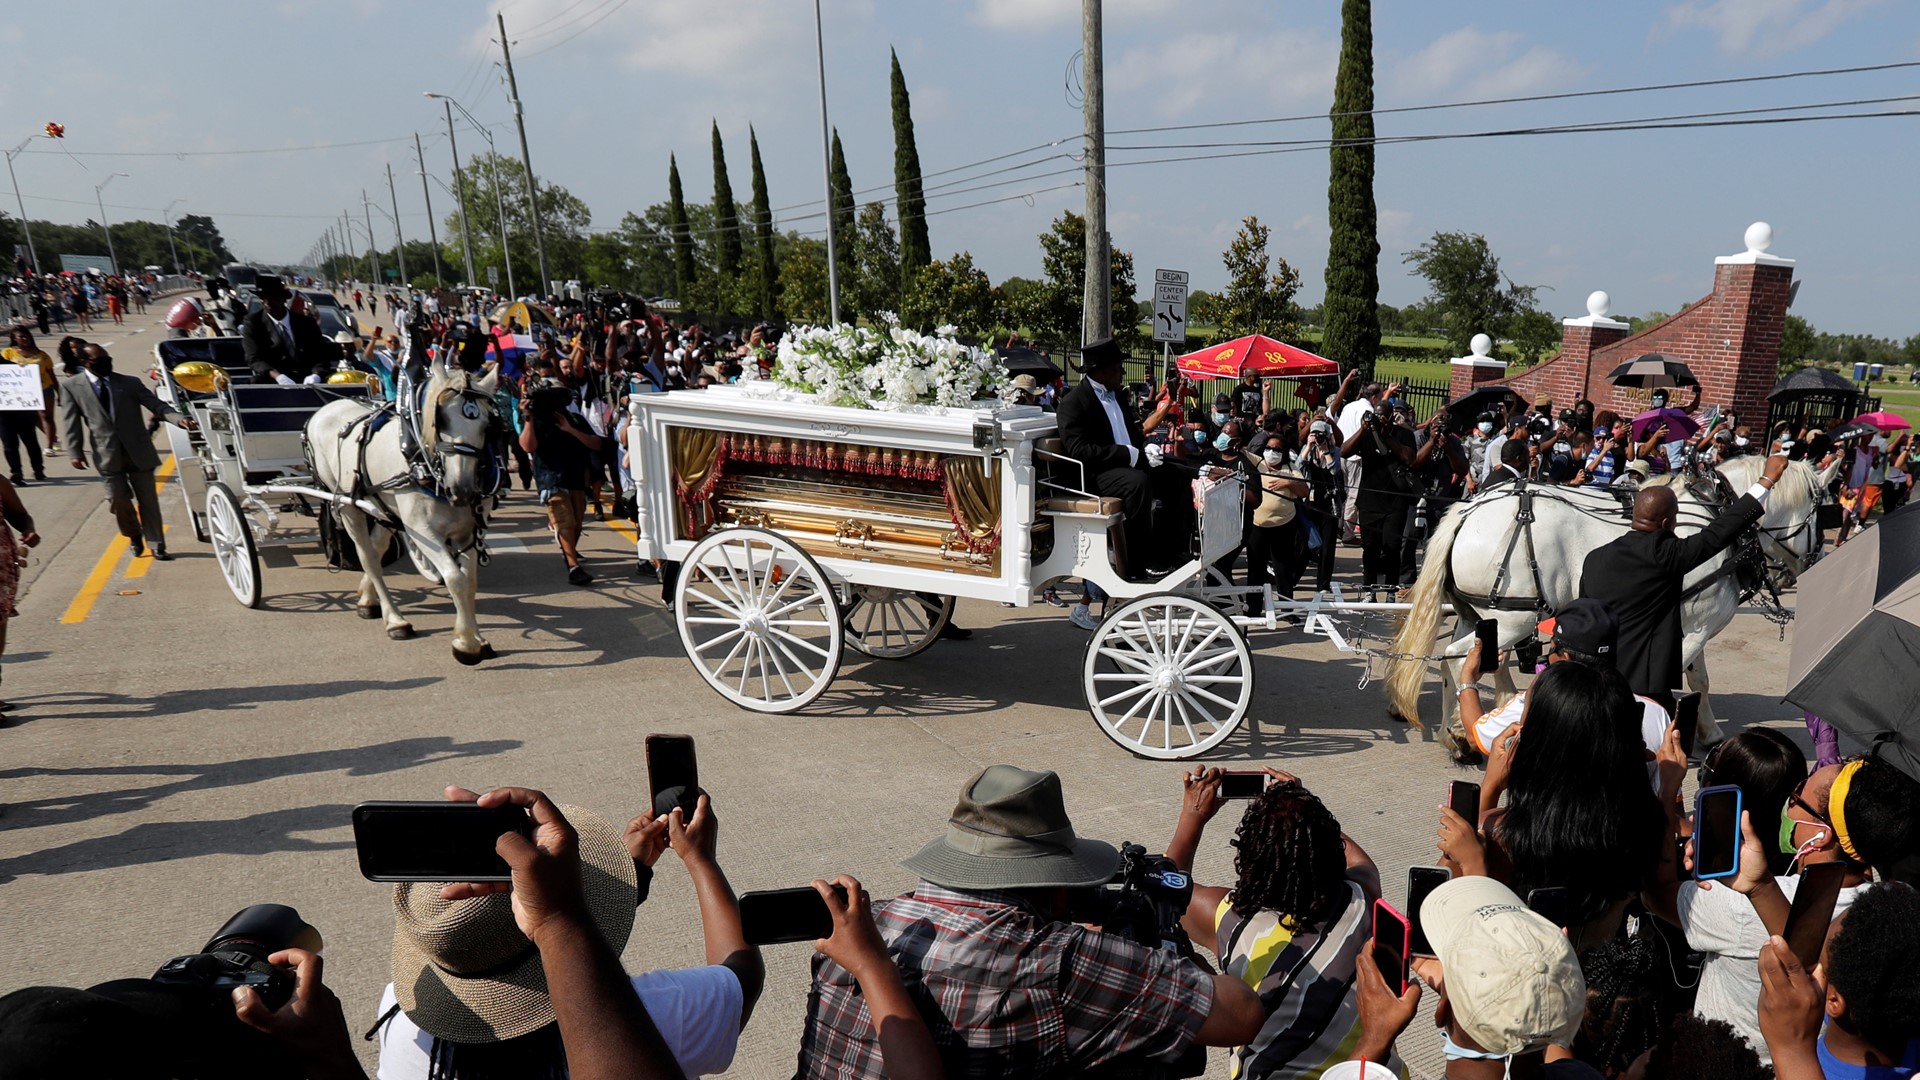 A horse-drawn hearse transported Floyd's body during the final mile of his funeral procession